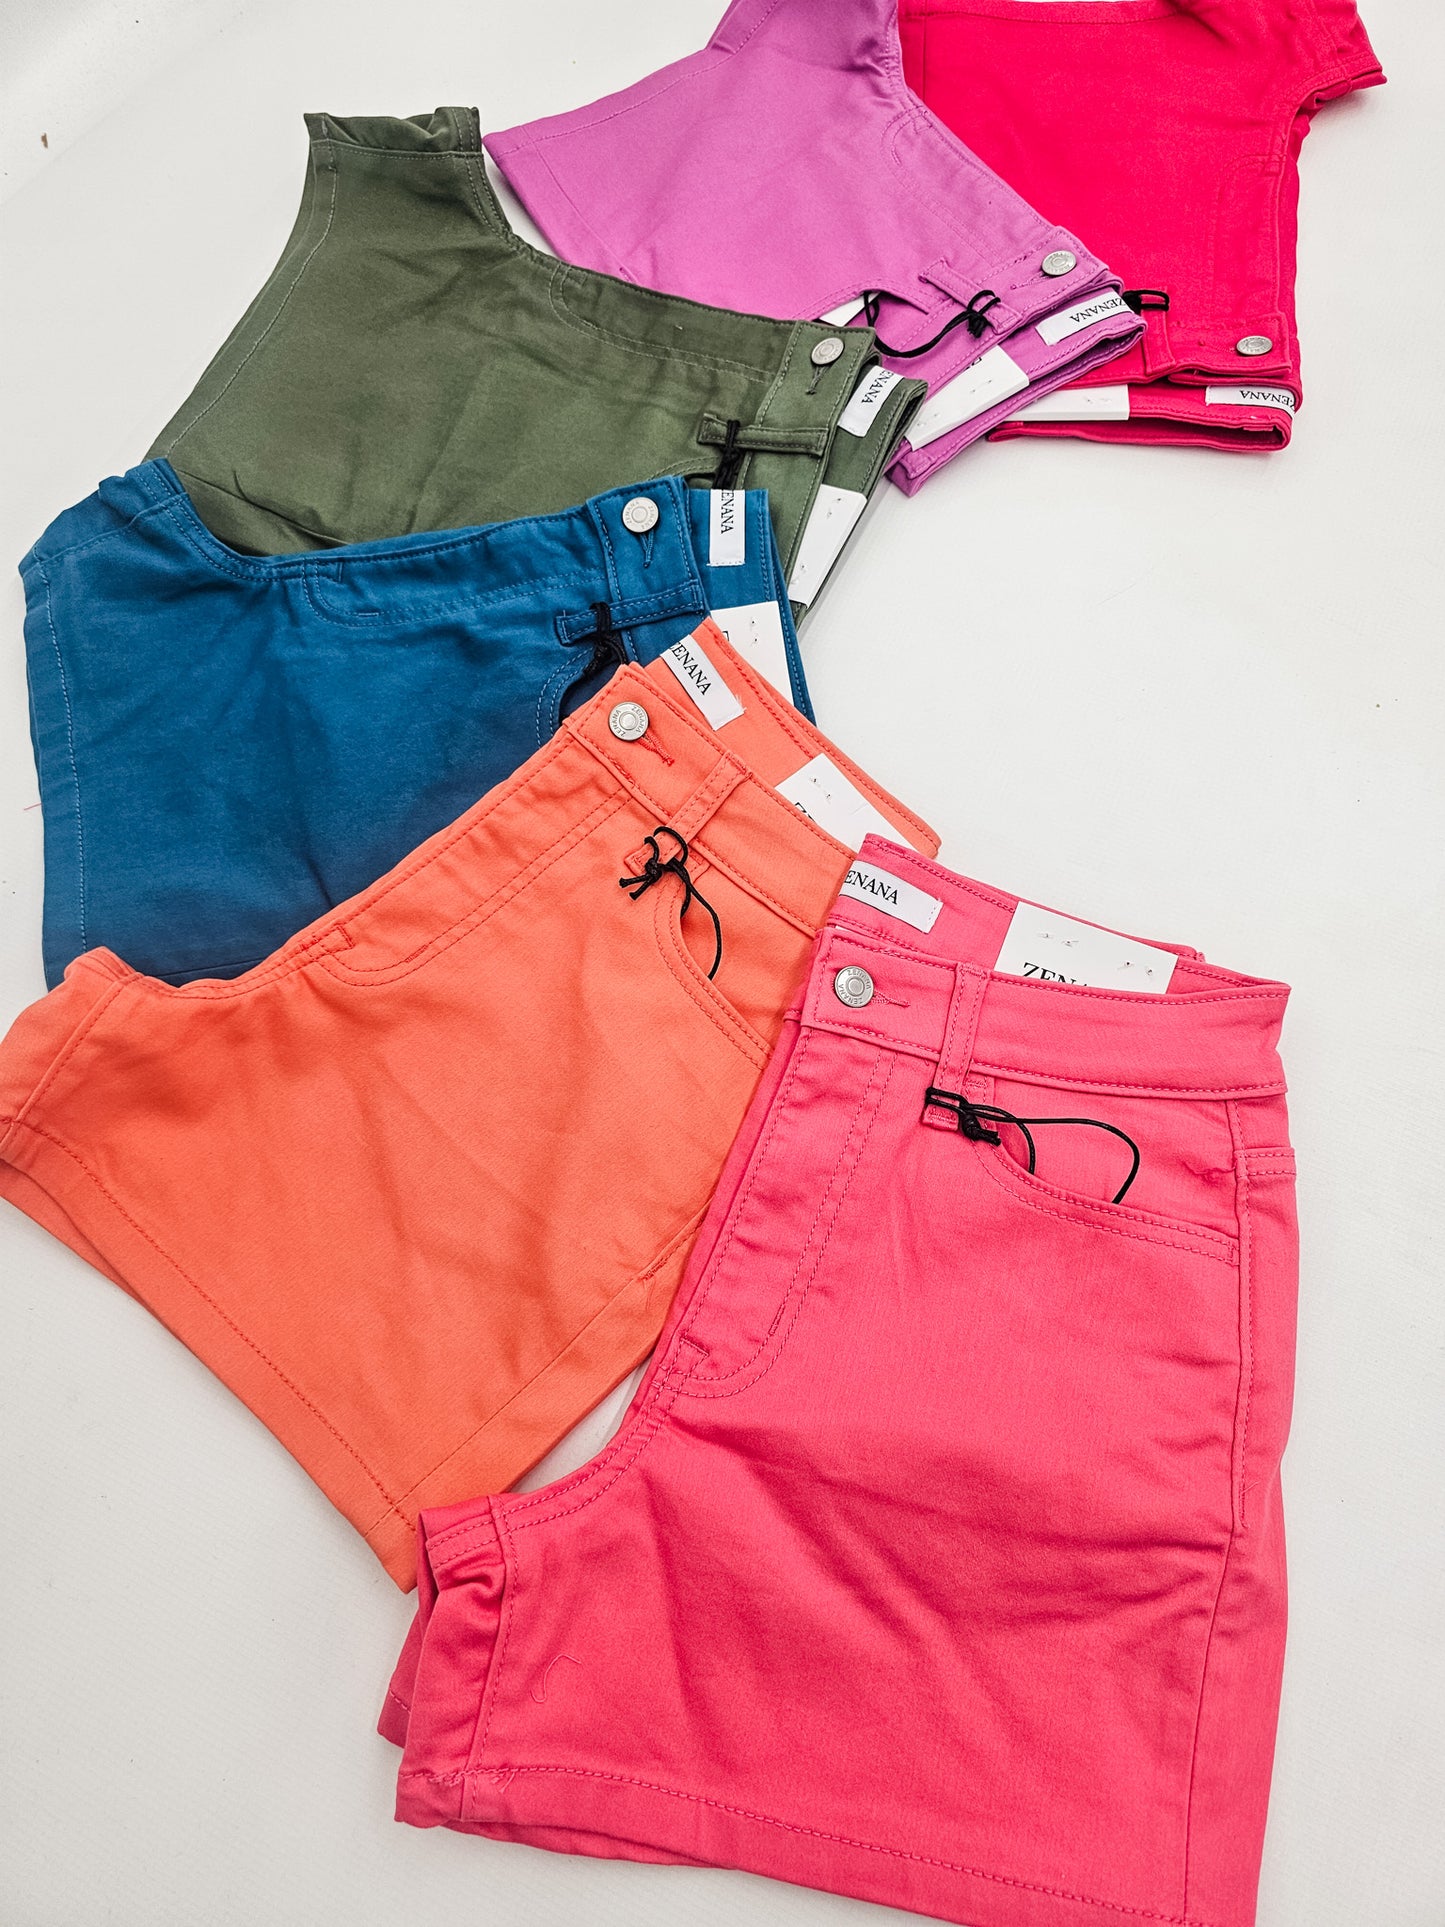 High-Rise Color Jean Shorts - Variety